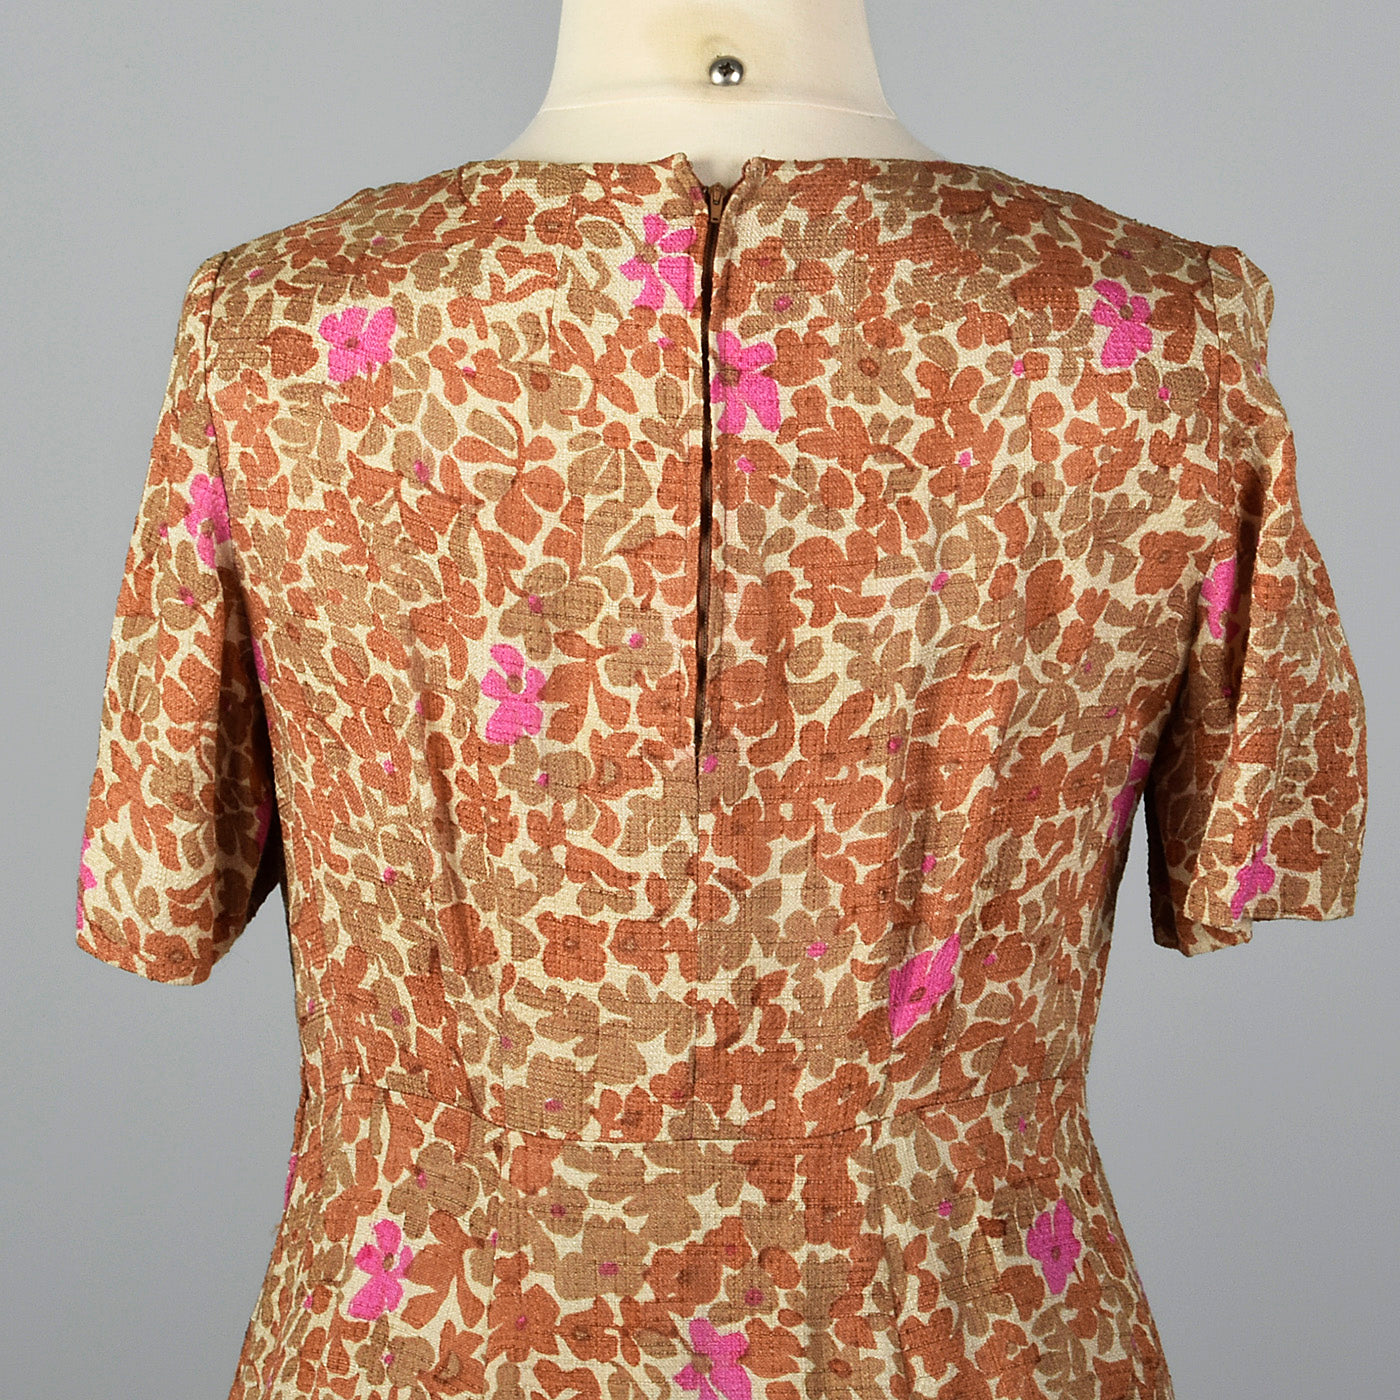 1950s Brown Floral Dress with Cut Out Neck